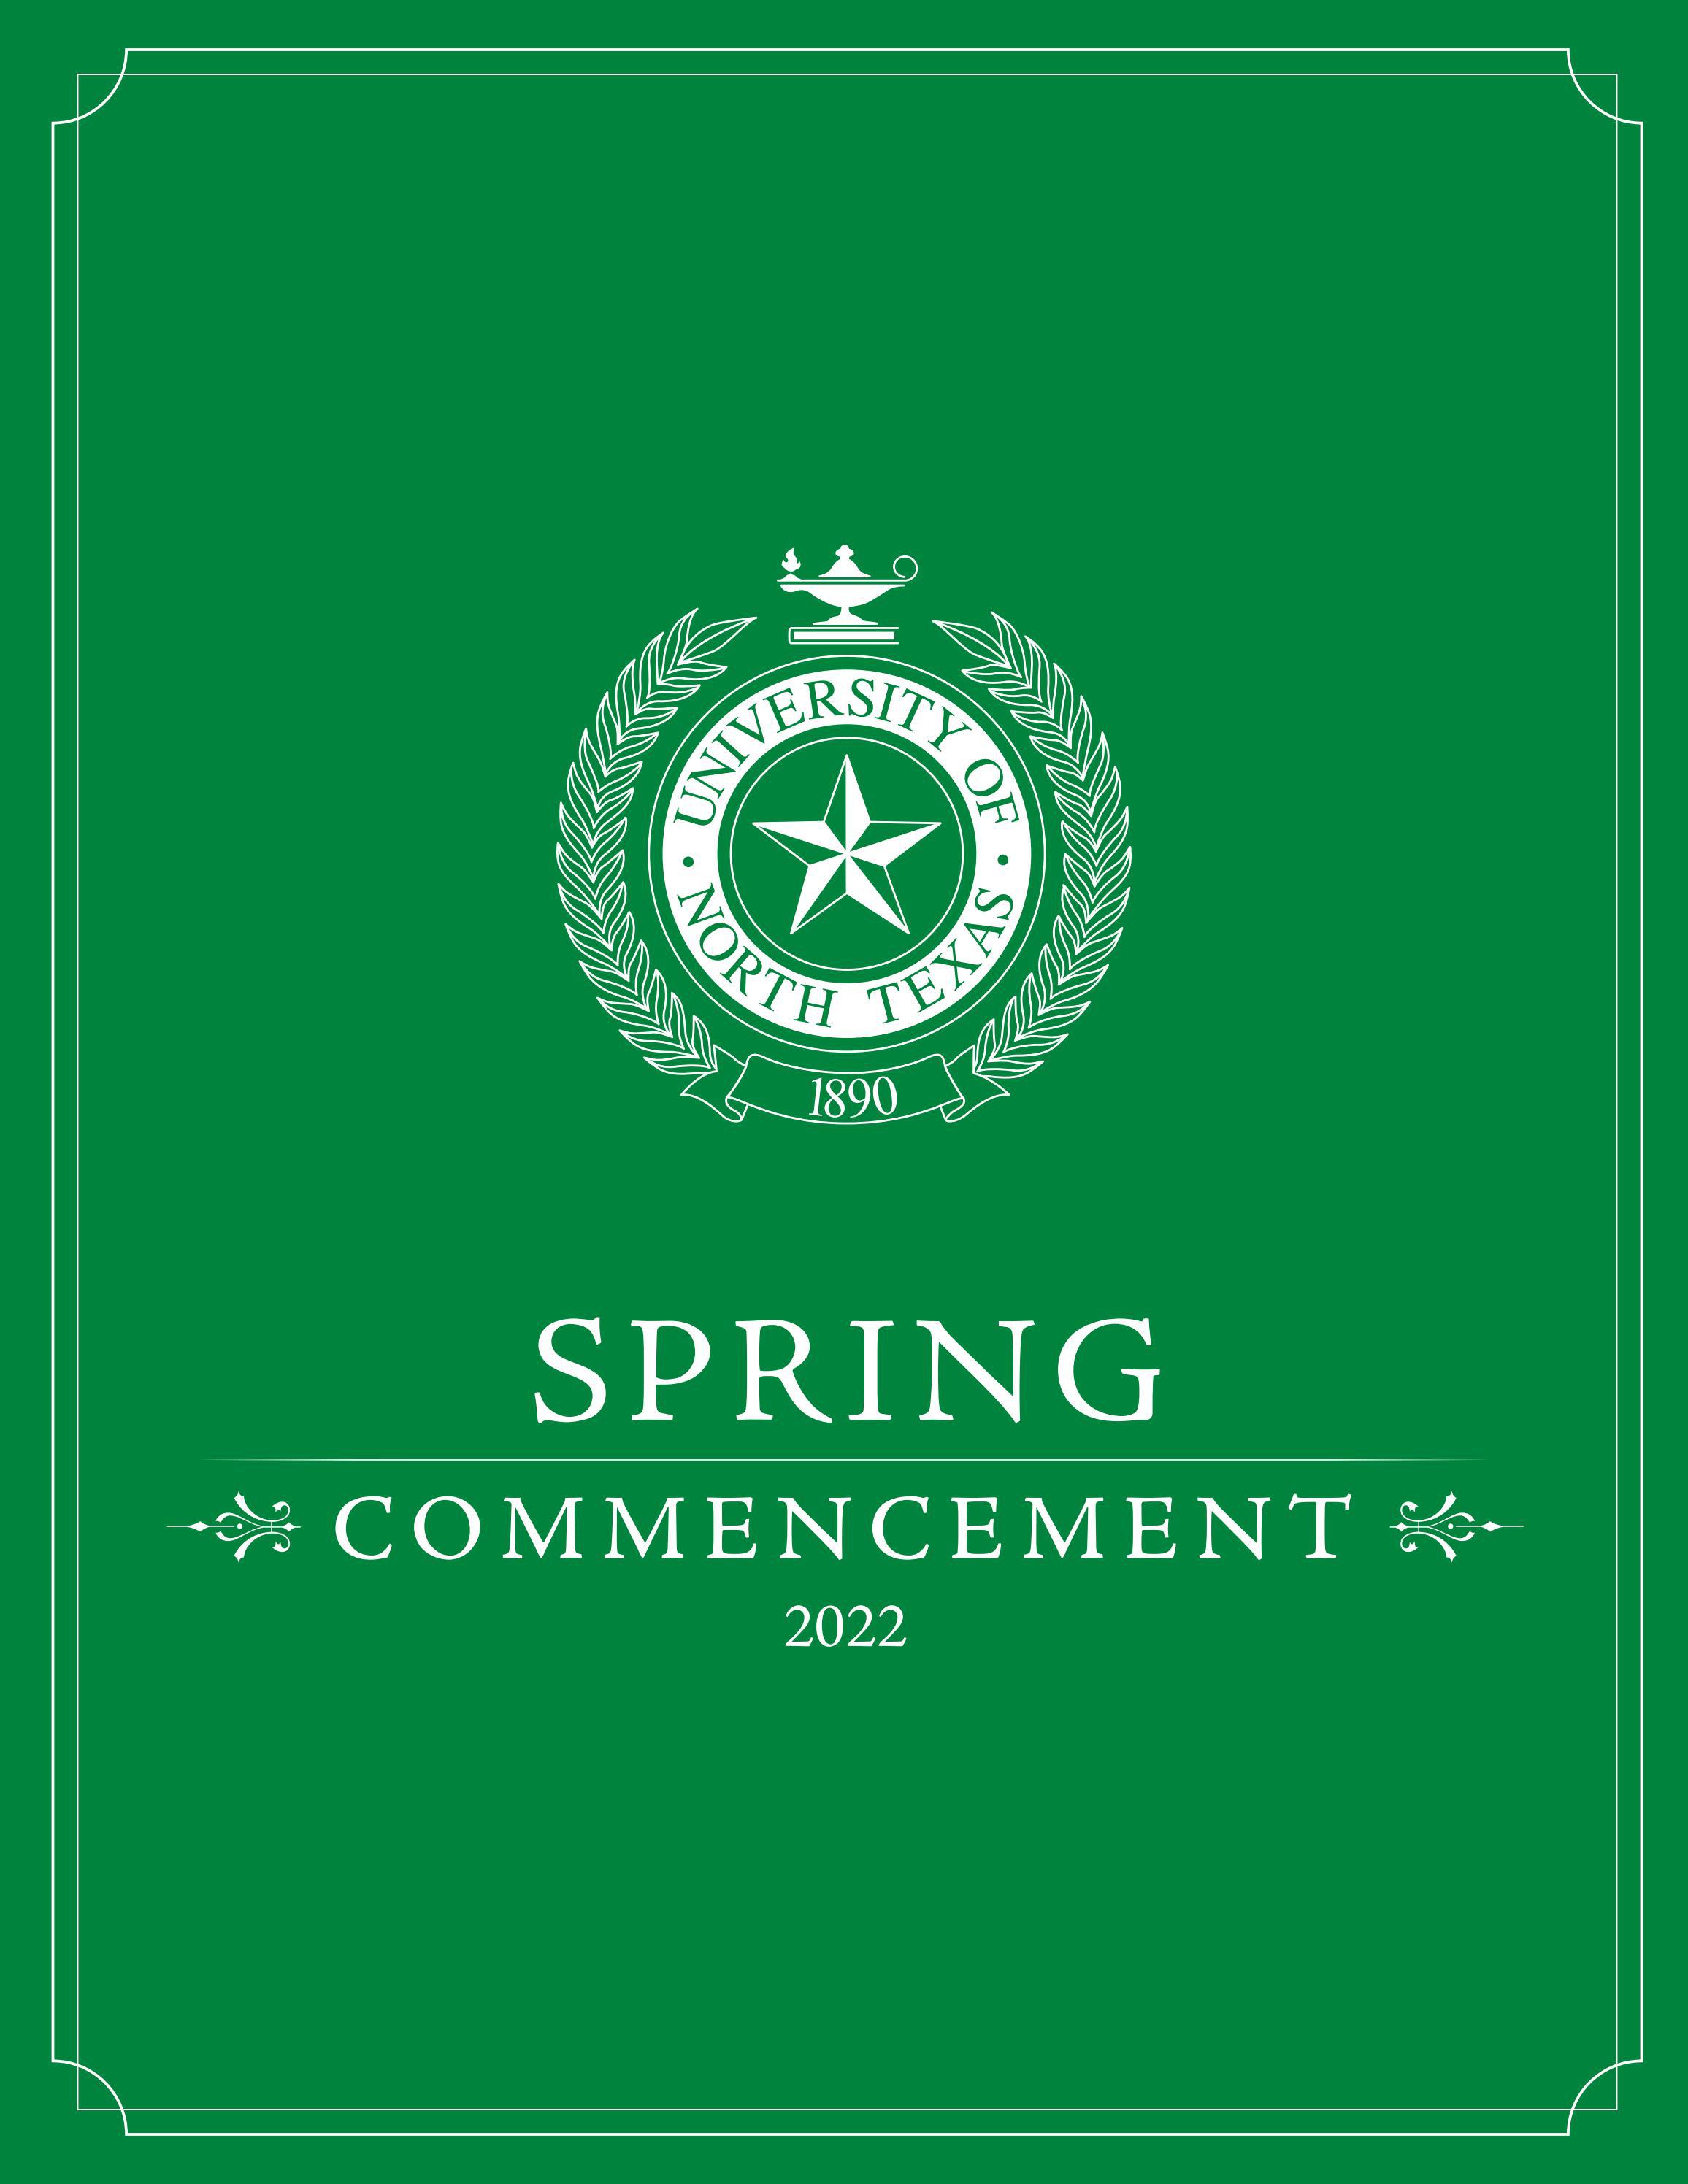 University of north texas spring mencement by university of north texas